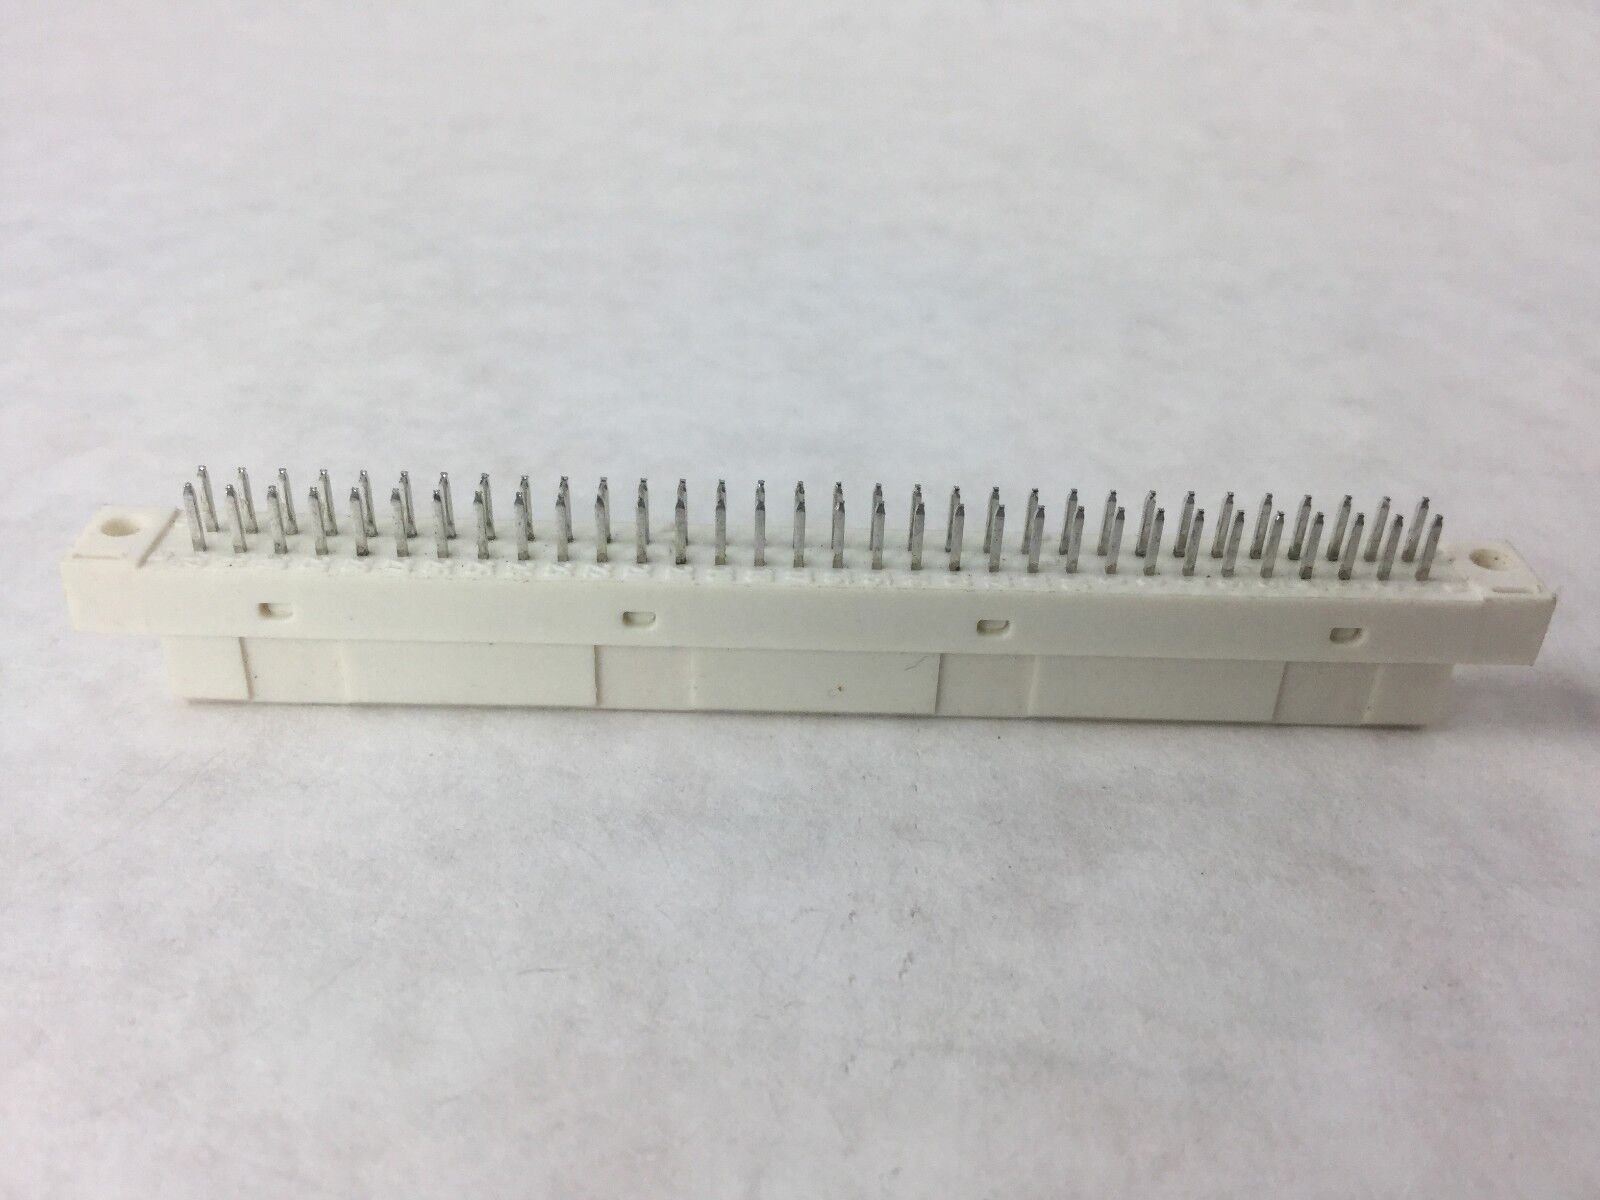 ELCO 8257 Connector, NEW